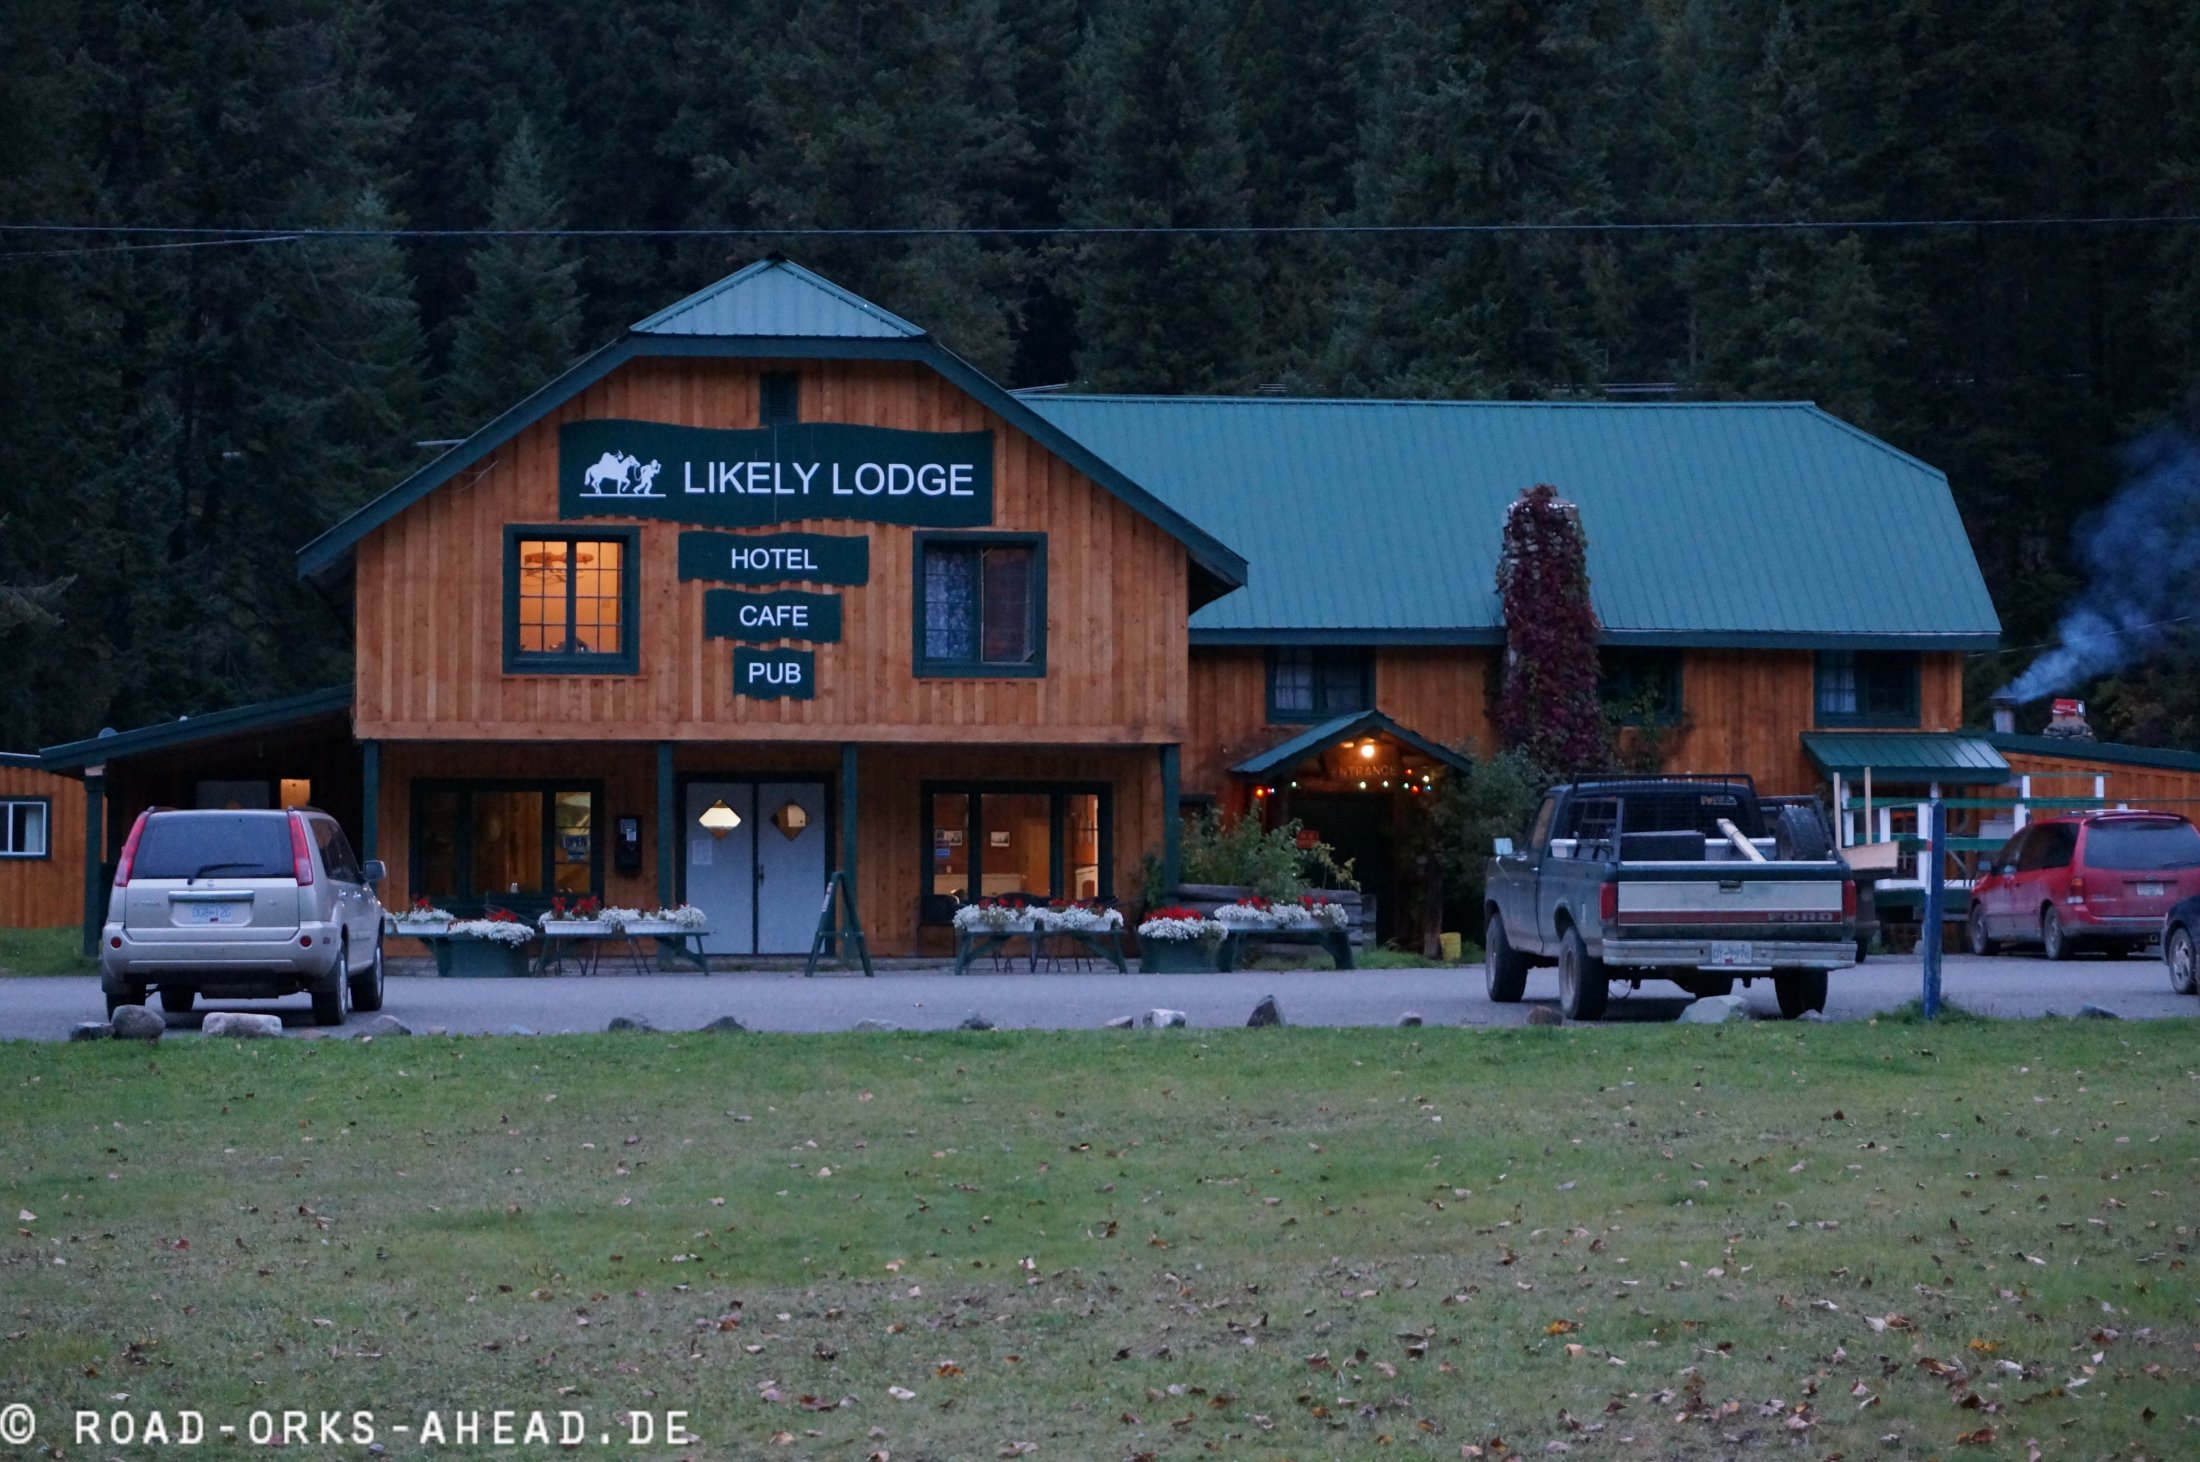 Likely Lodge